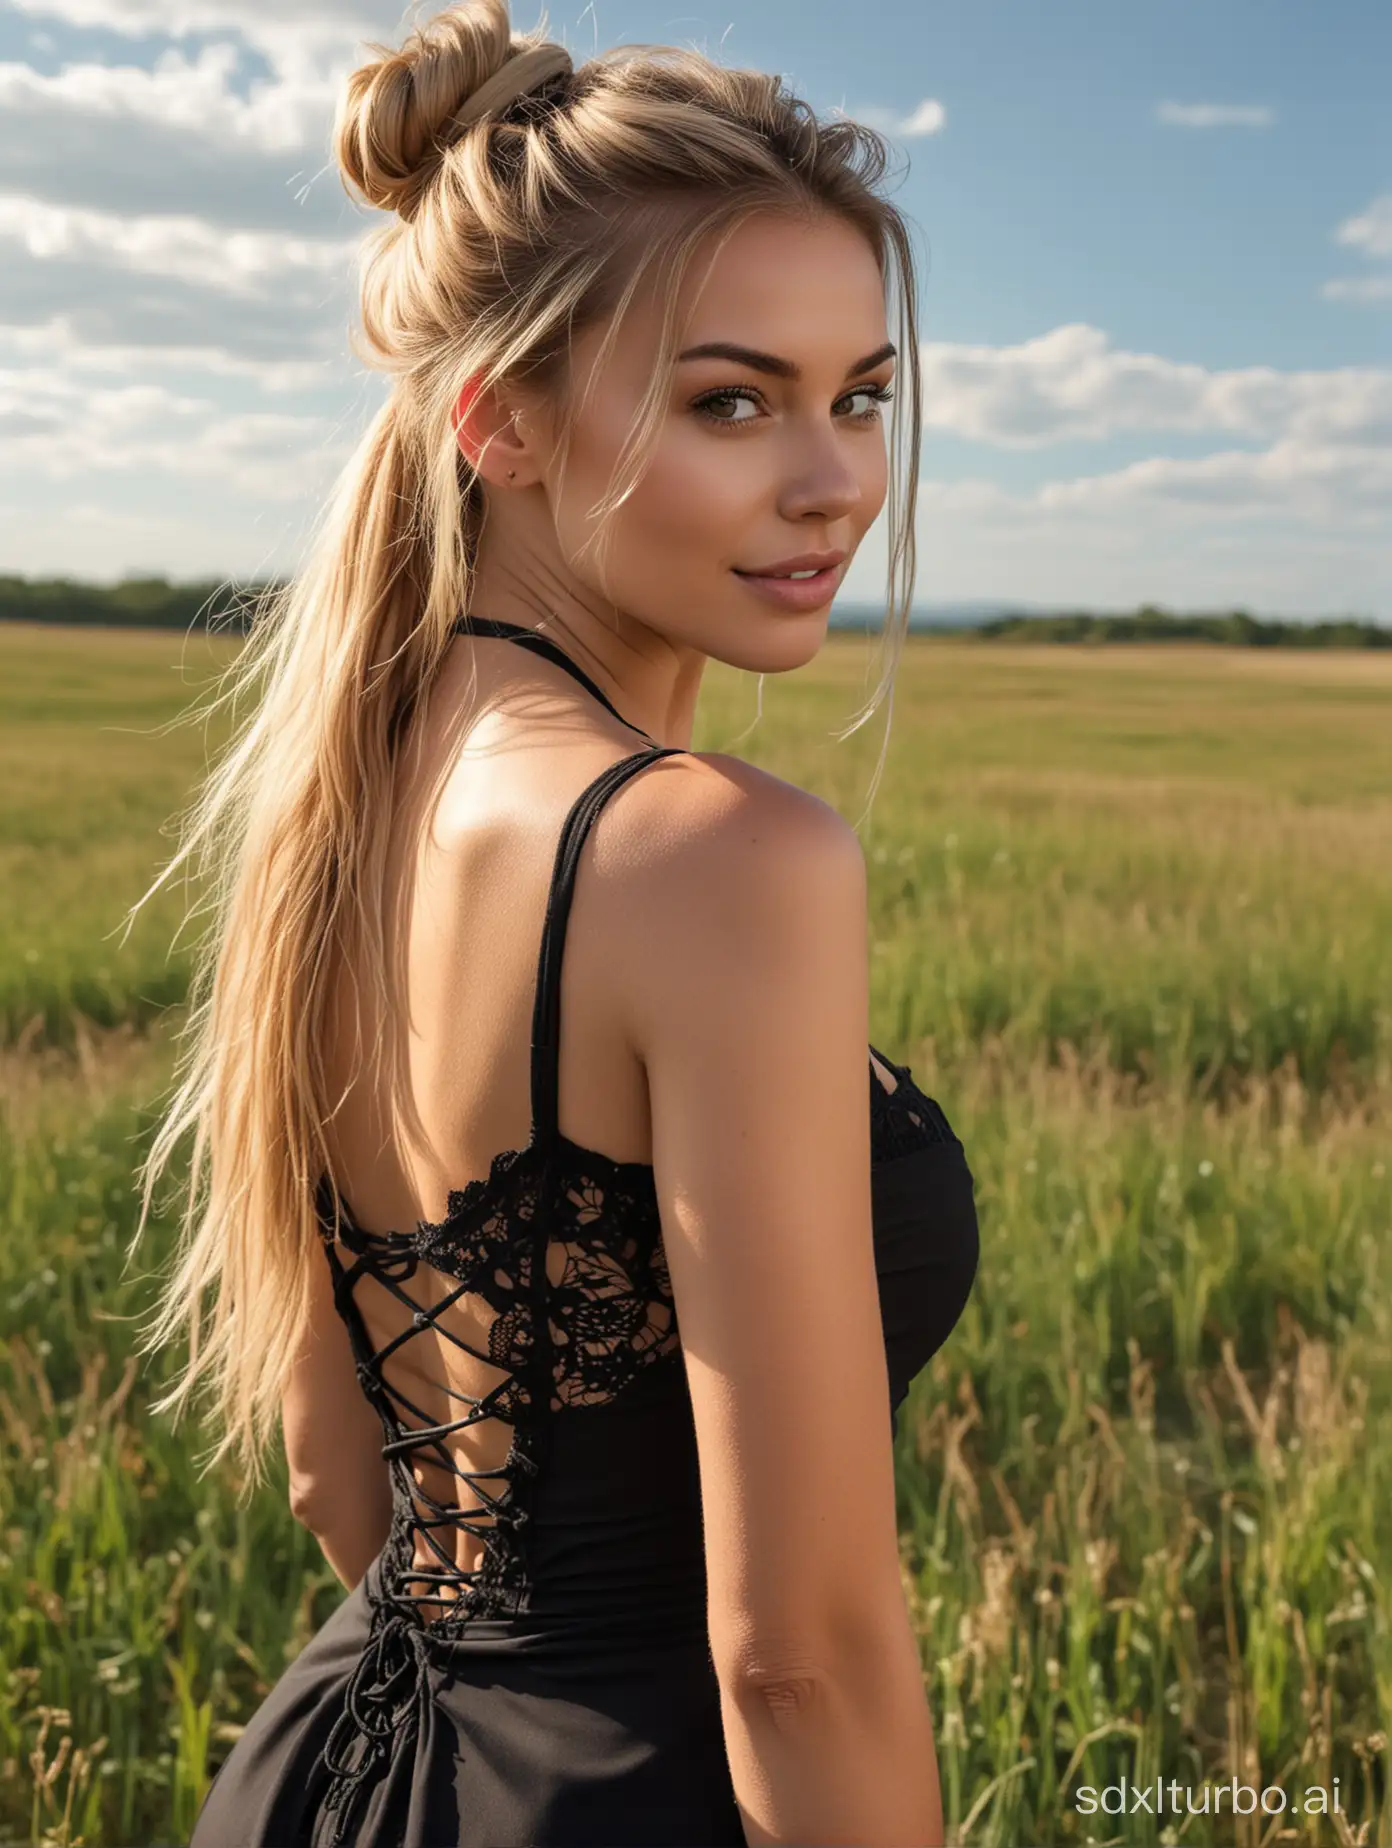 A stunning sexy super model woman with rosy skin stands in a field, her long blonde hair tied as messy bun. She wears a black bodycon dress with a lace-up back, accentuating her curves, big breasts and a big ass. With a natural smile and a gaze over her shoulder, she exudes confidence and sensuality. Brunette model